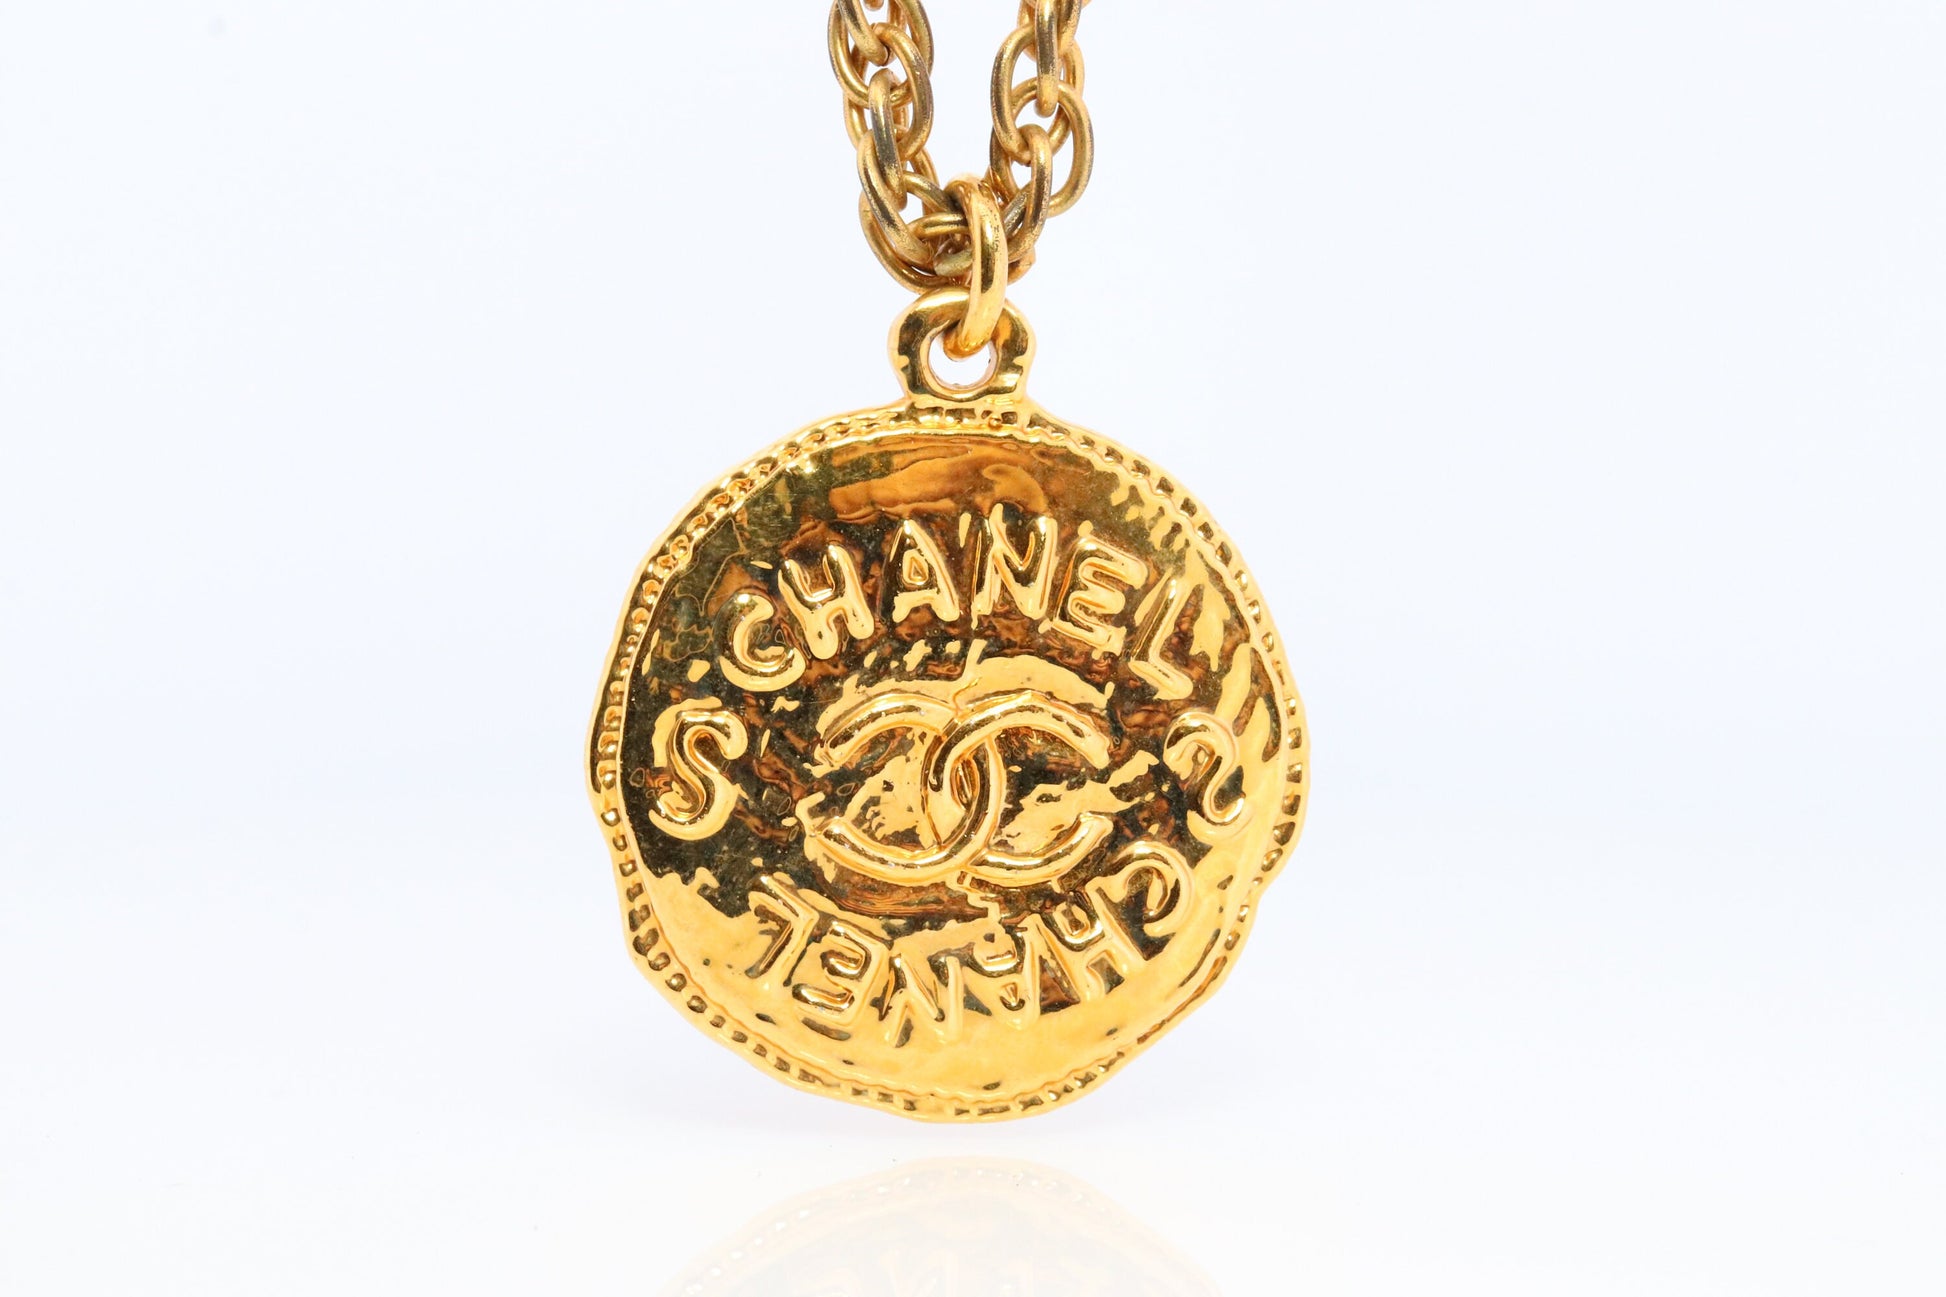 Chanel Necklace. Genuine CC CHANEL Round LOGO Coin Necklace. Disc Medallion Necklace. byzantine Etruscan Hammered Coco Chanel Necklace